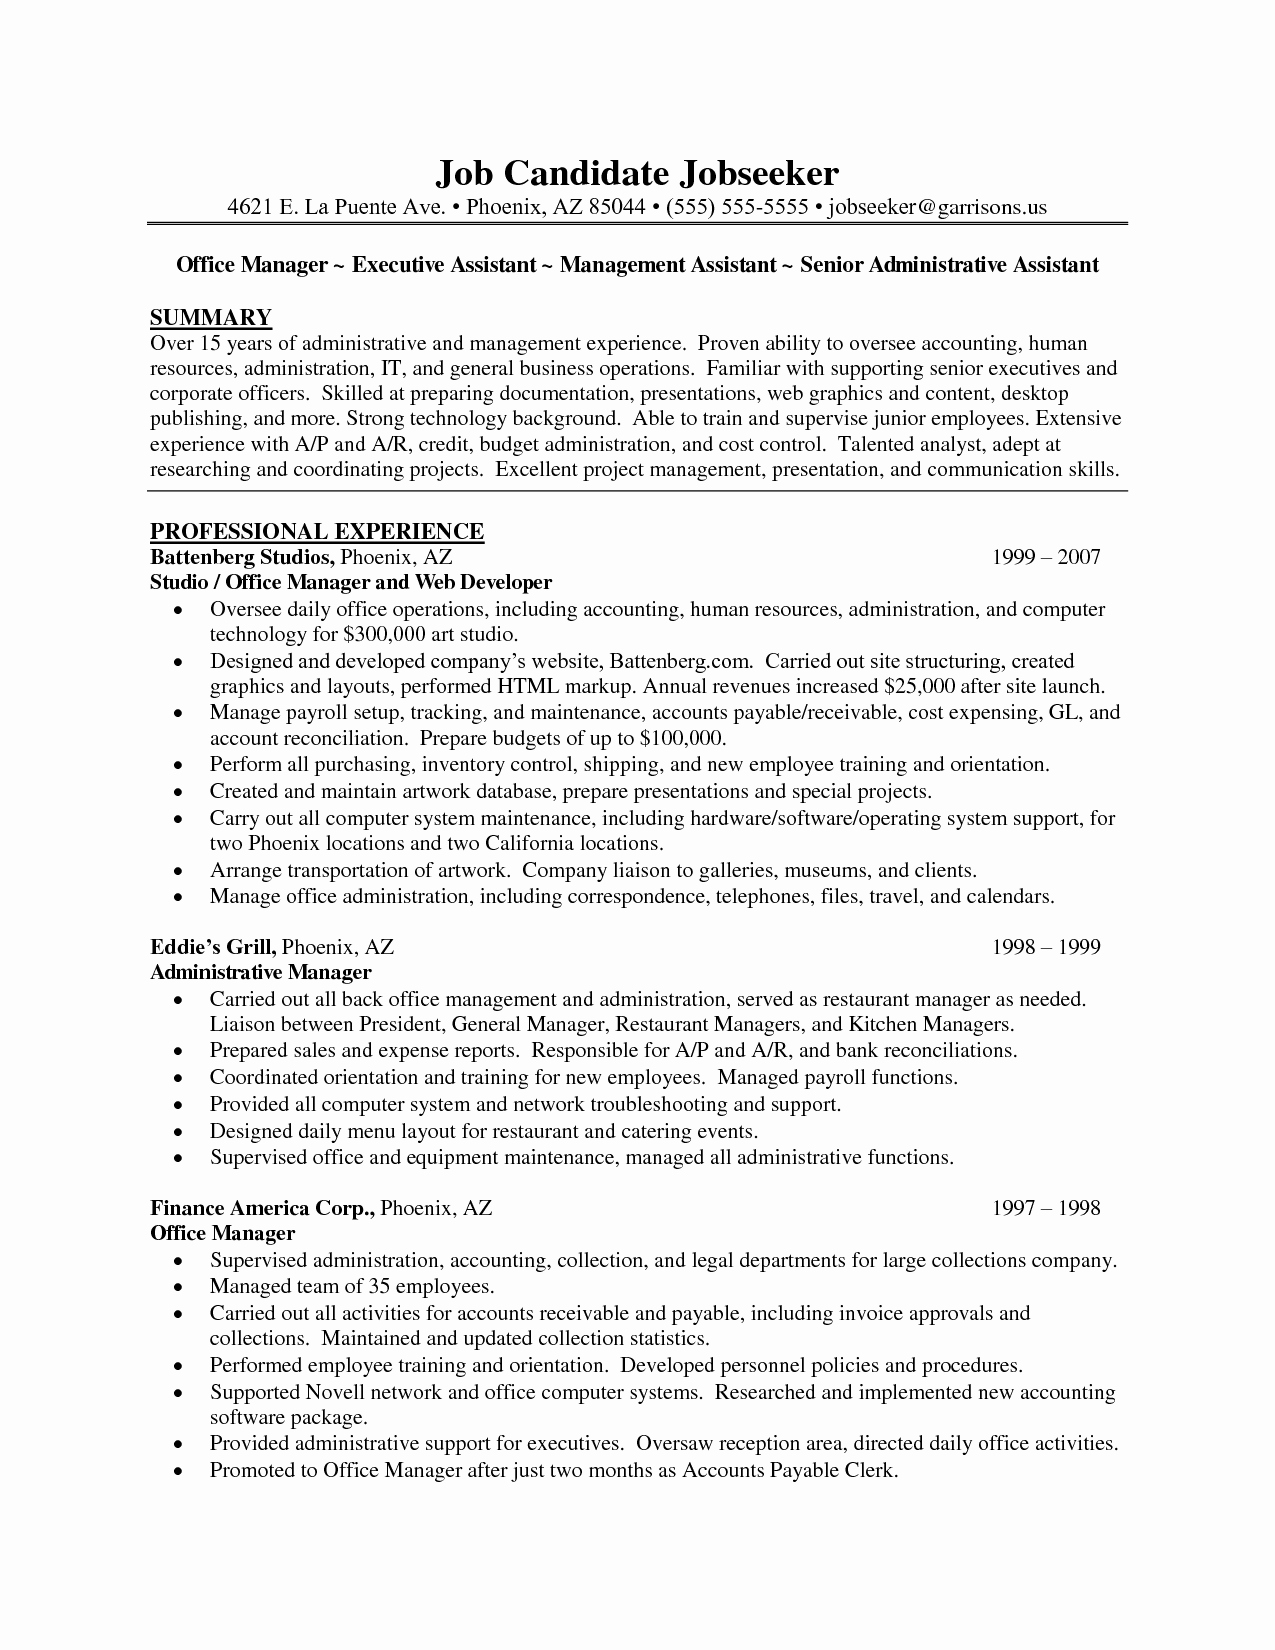 Entry Level Administrative assistant Resume Objective